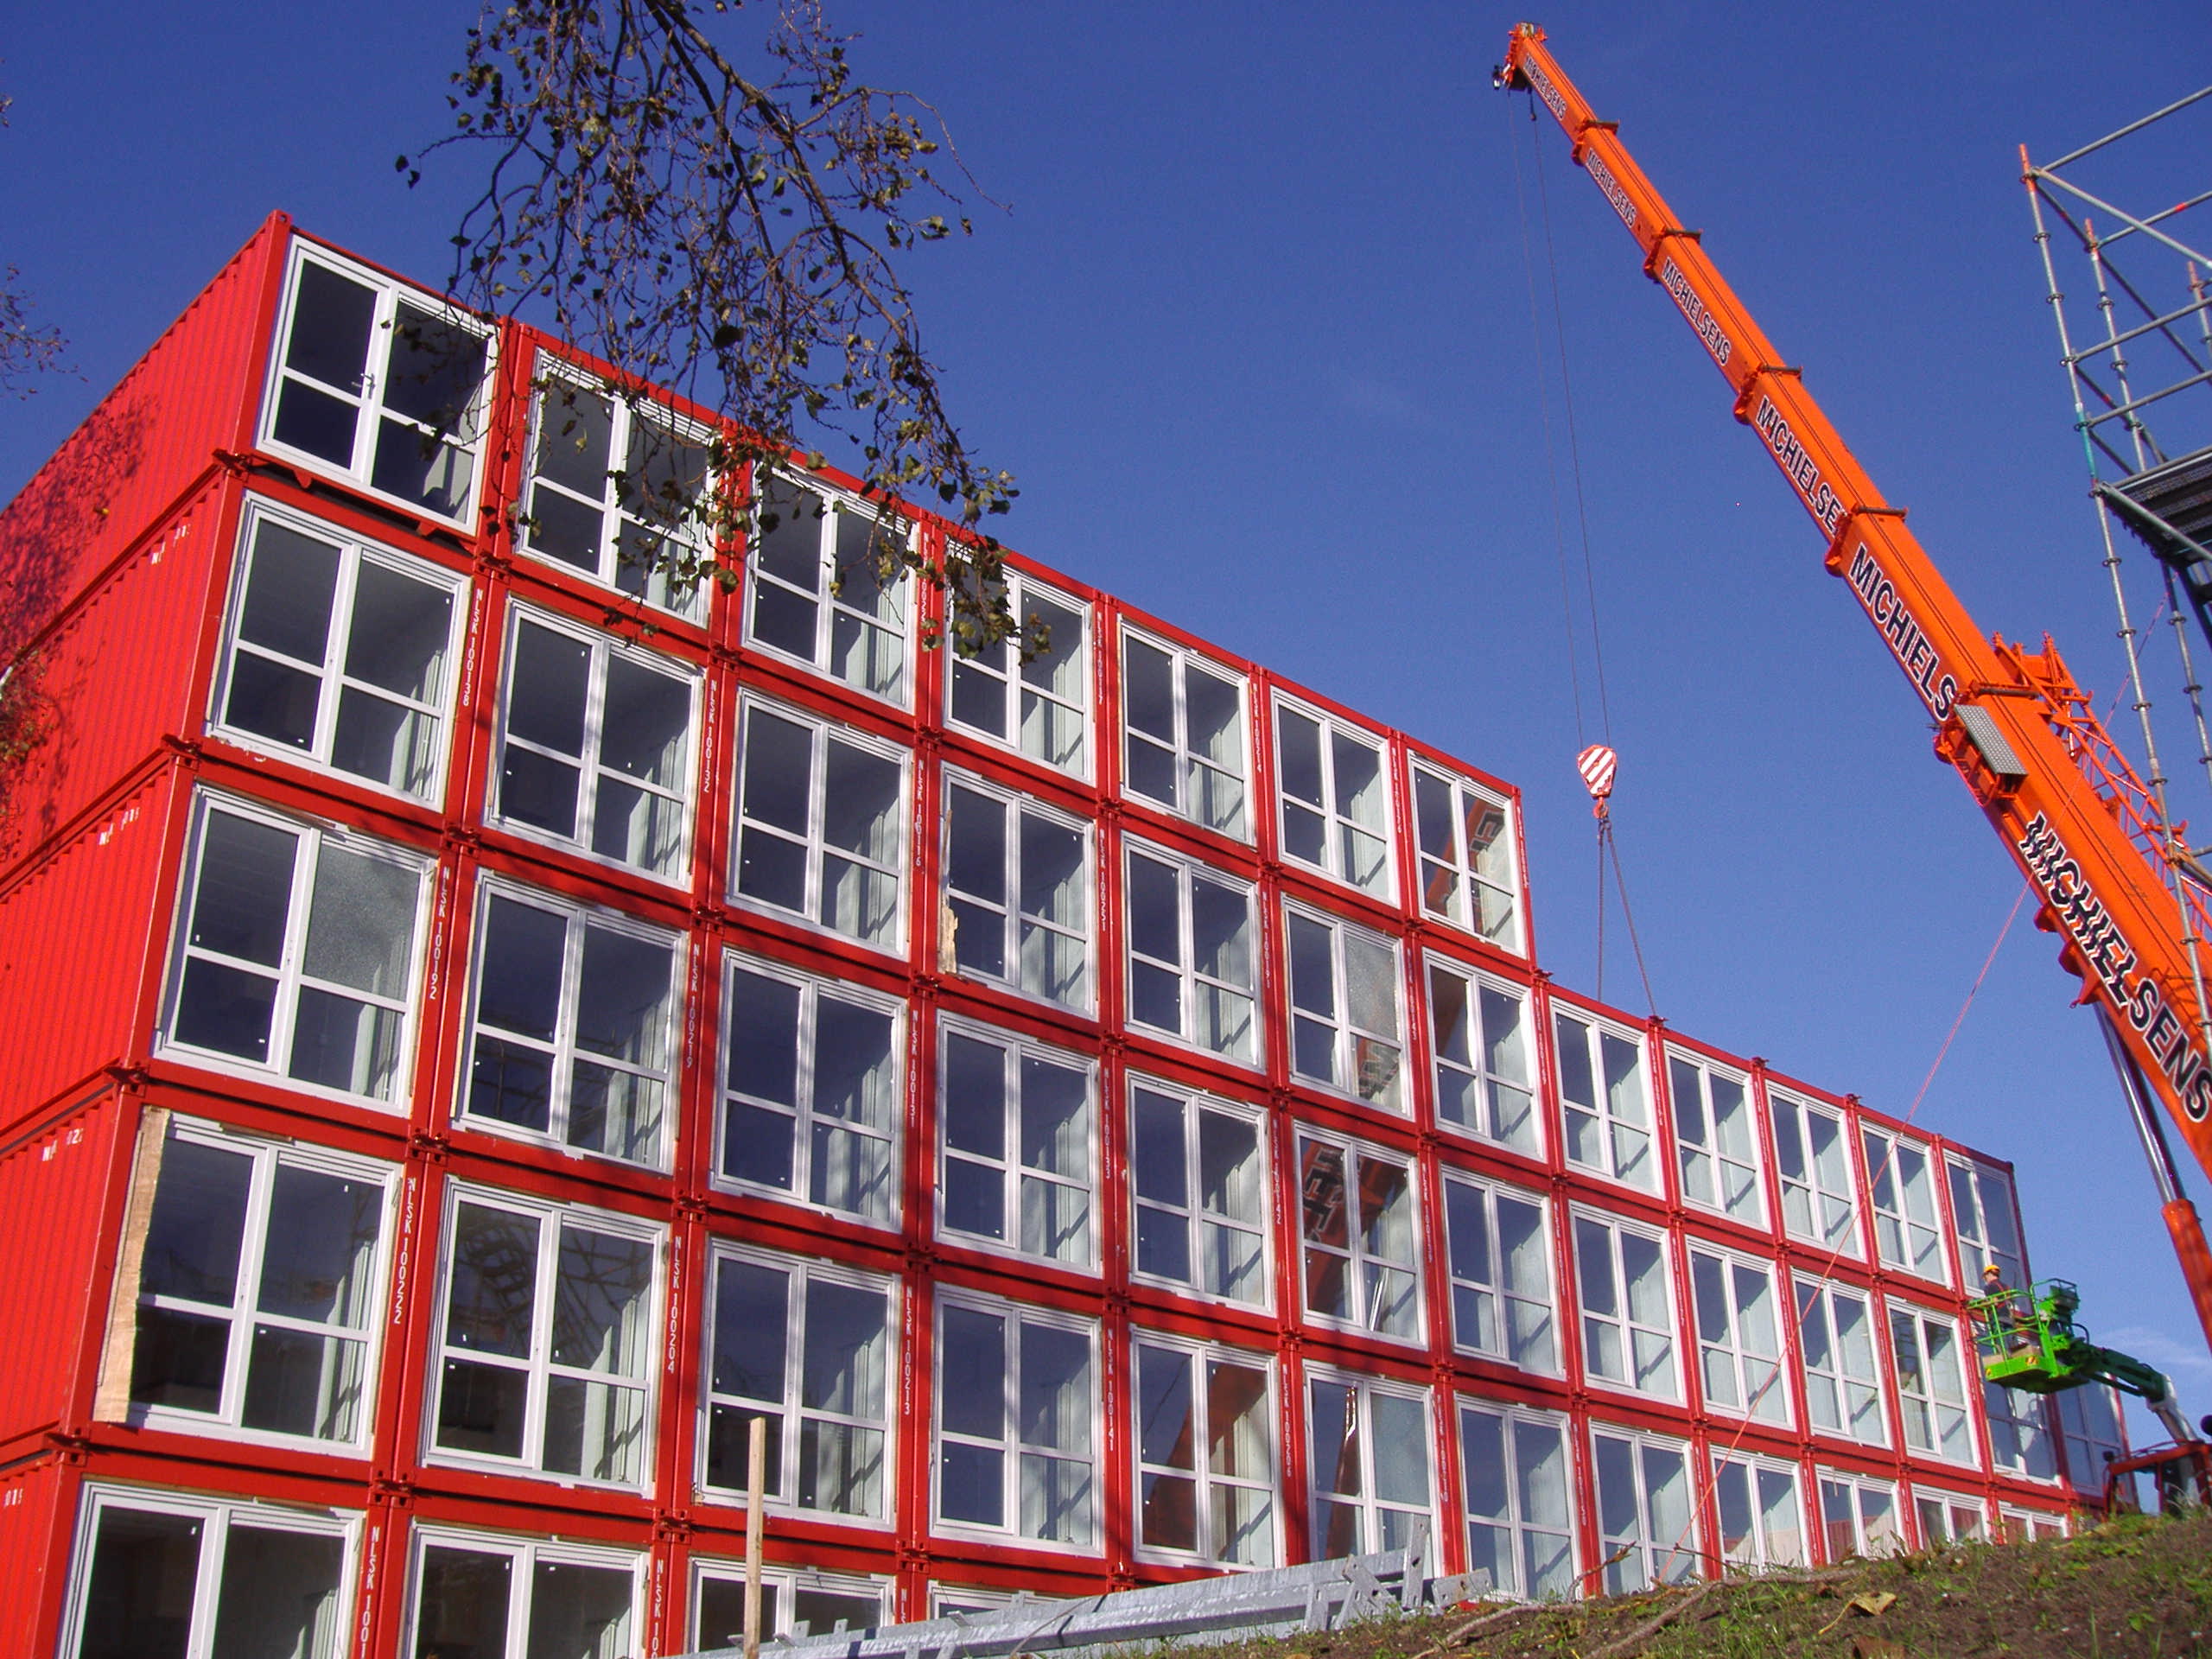 This photo shows a stack of shipping containers, butt ends facing the viewer, five containers high and more than ten containers wide on the base of the building. The shipping containers are red but the butt ends are entirely filled with a window divided in four panes and trimmed in white.